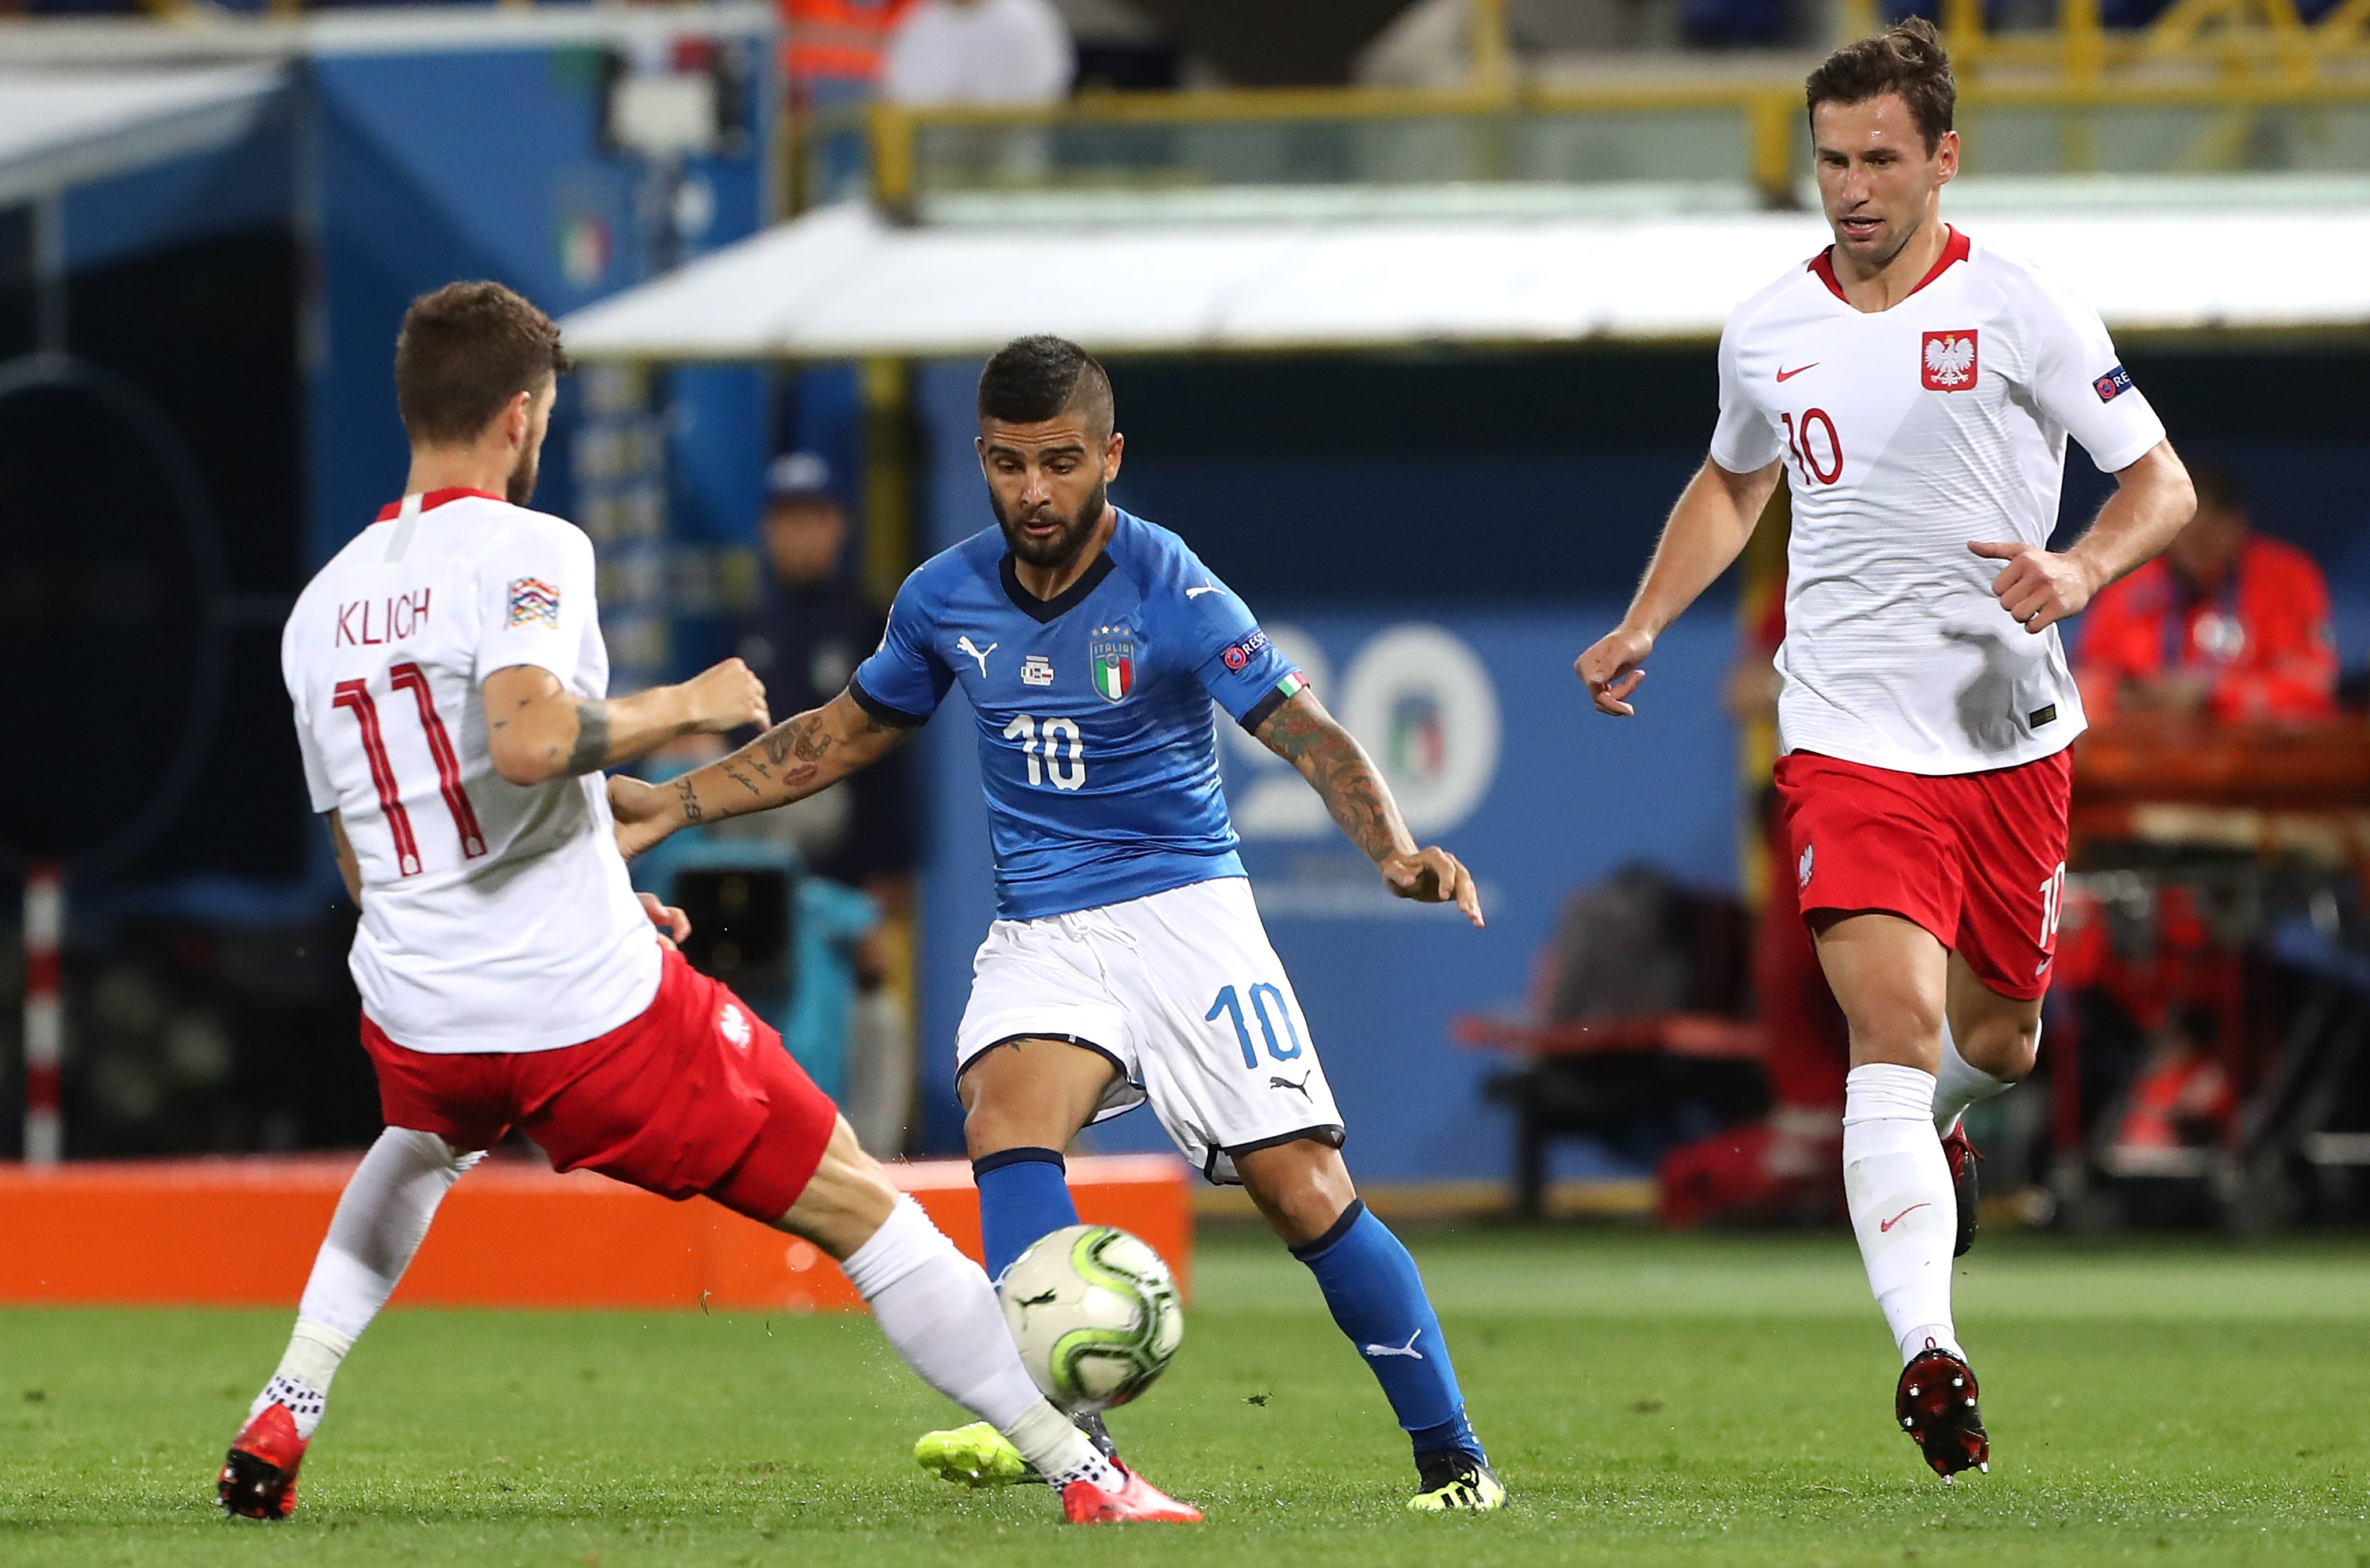 BOLOGNA, ITALY - SEPTEMBER 07:  Lorenzo Insigne of Italy competes for the ball against Mateusz Klich of Poland during the UEFA Nations League A group three match between Italy and Poland at Stadio Renato Dall'Ara on September 7, 2018 in Bologna, Italy.  (Photo by Marco Luzzani/Getty Images)